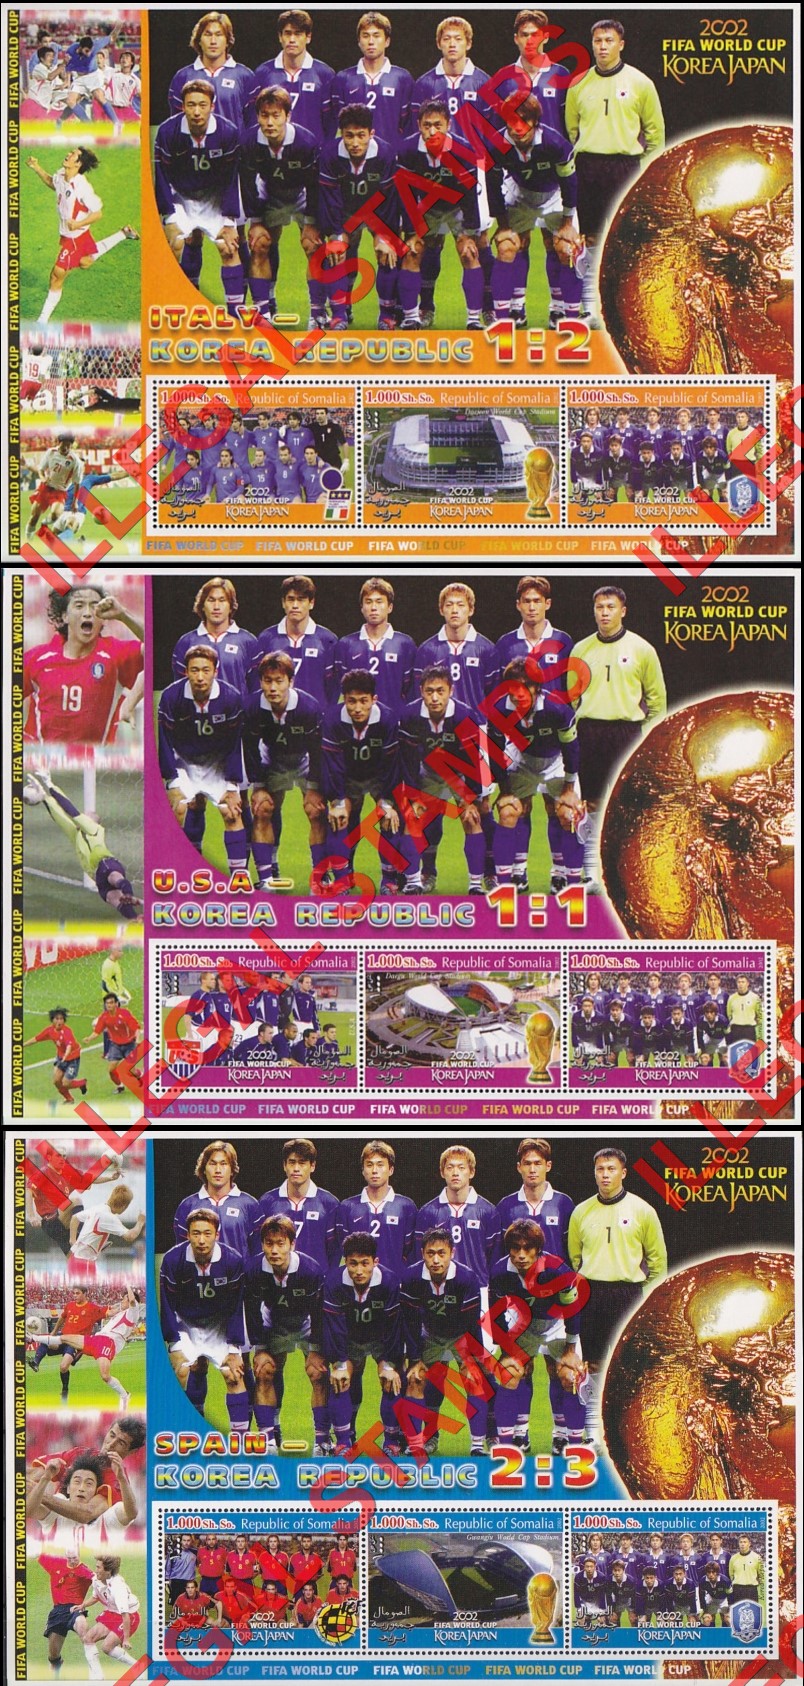 Somalia 2002 World Cup Soccer Illegal Stamp Souvenir Sheets of 3 (Part 1)